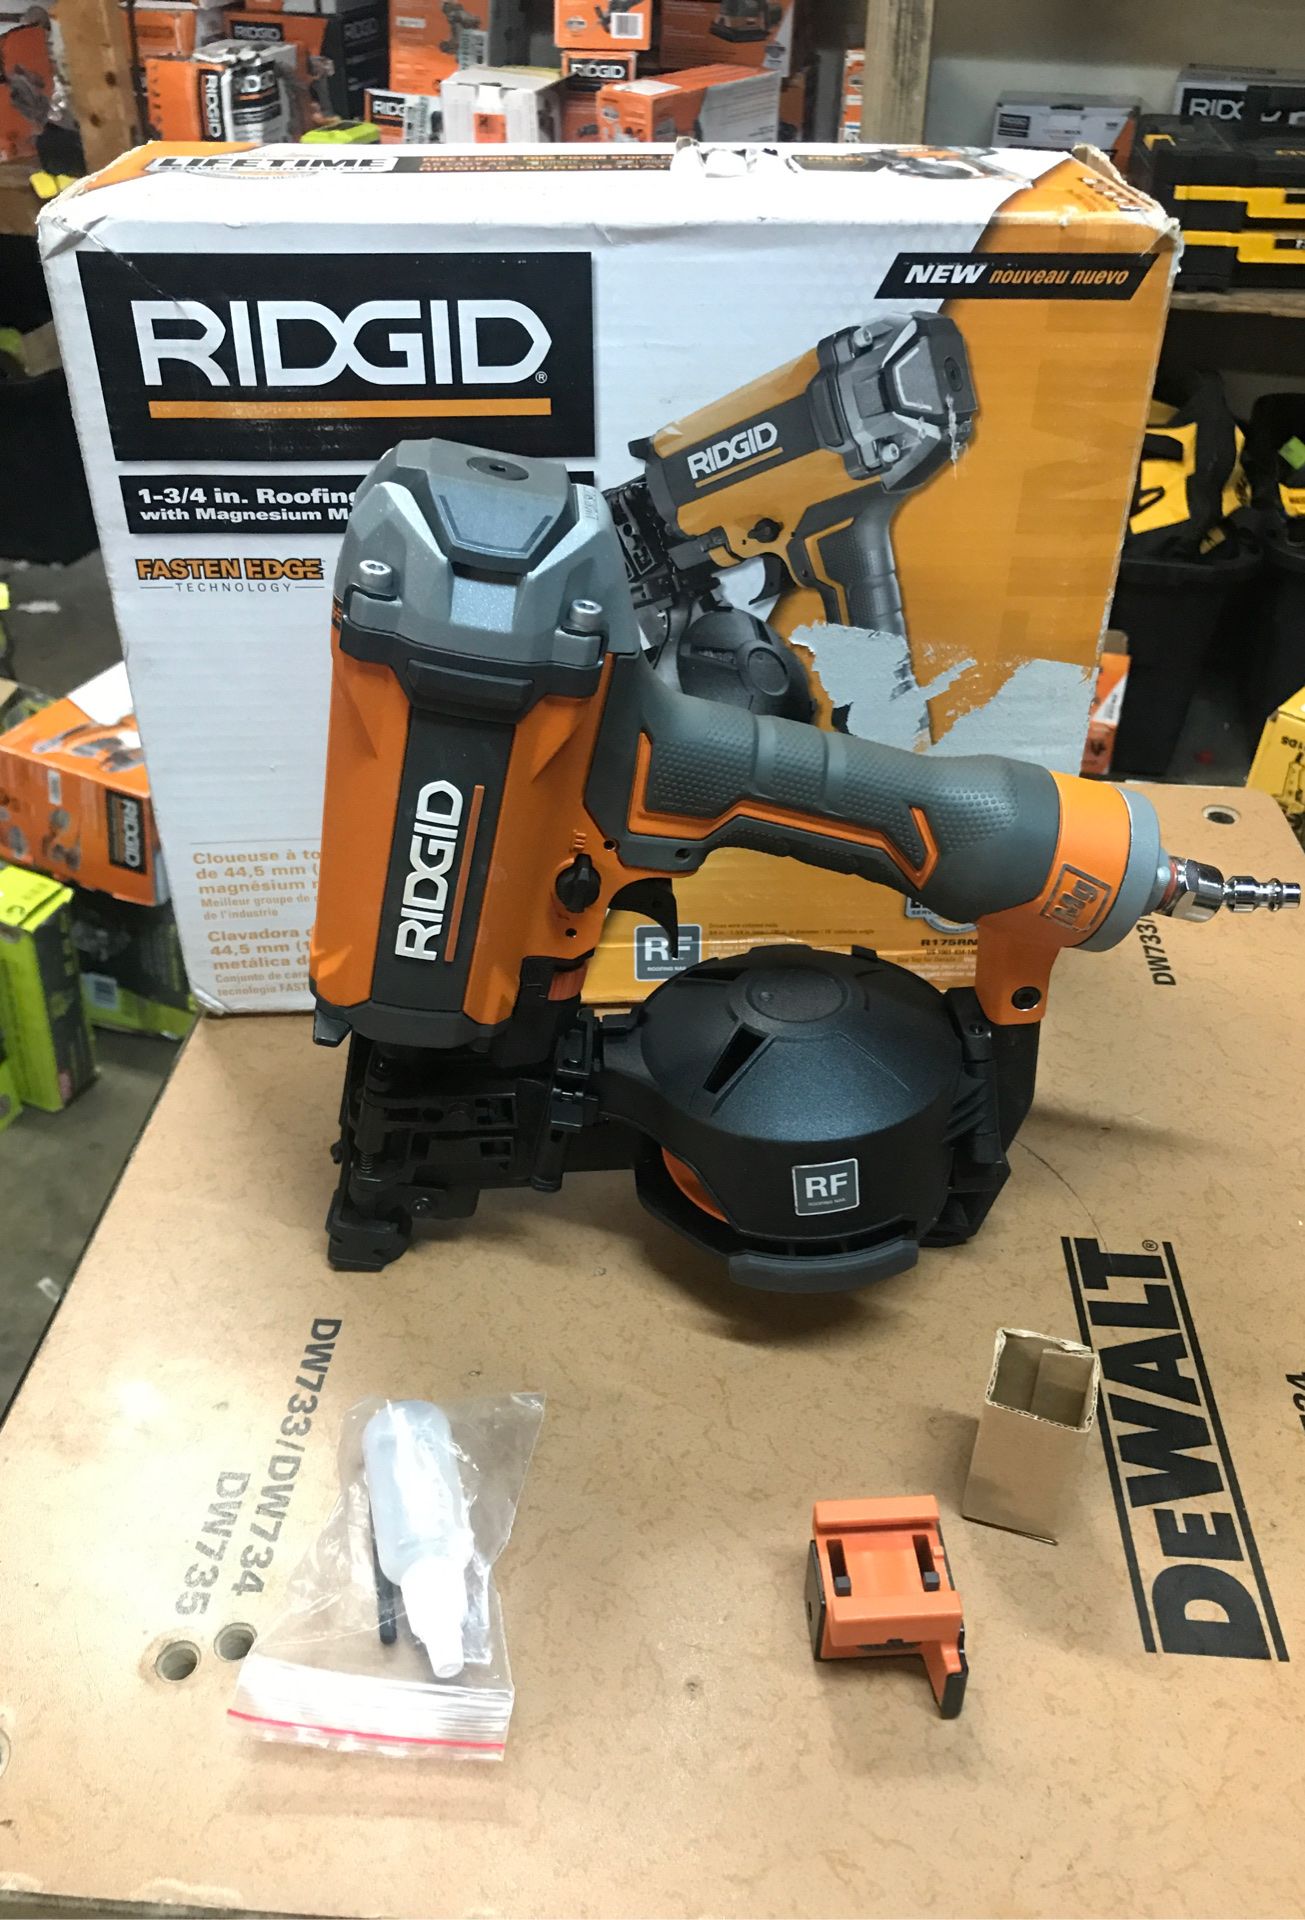 RIDGID 15-Degree 1-3/4 in. Coil Roofing Nailer